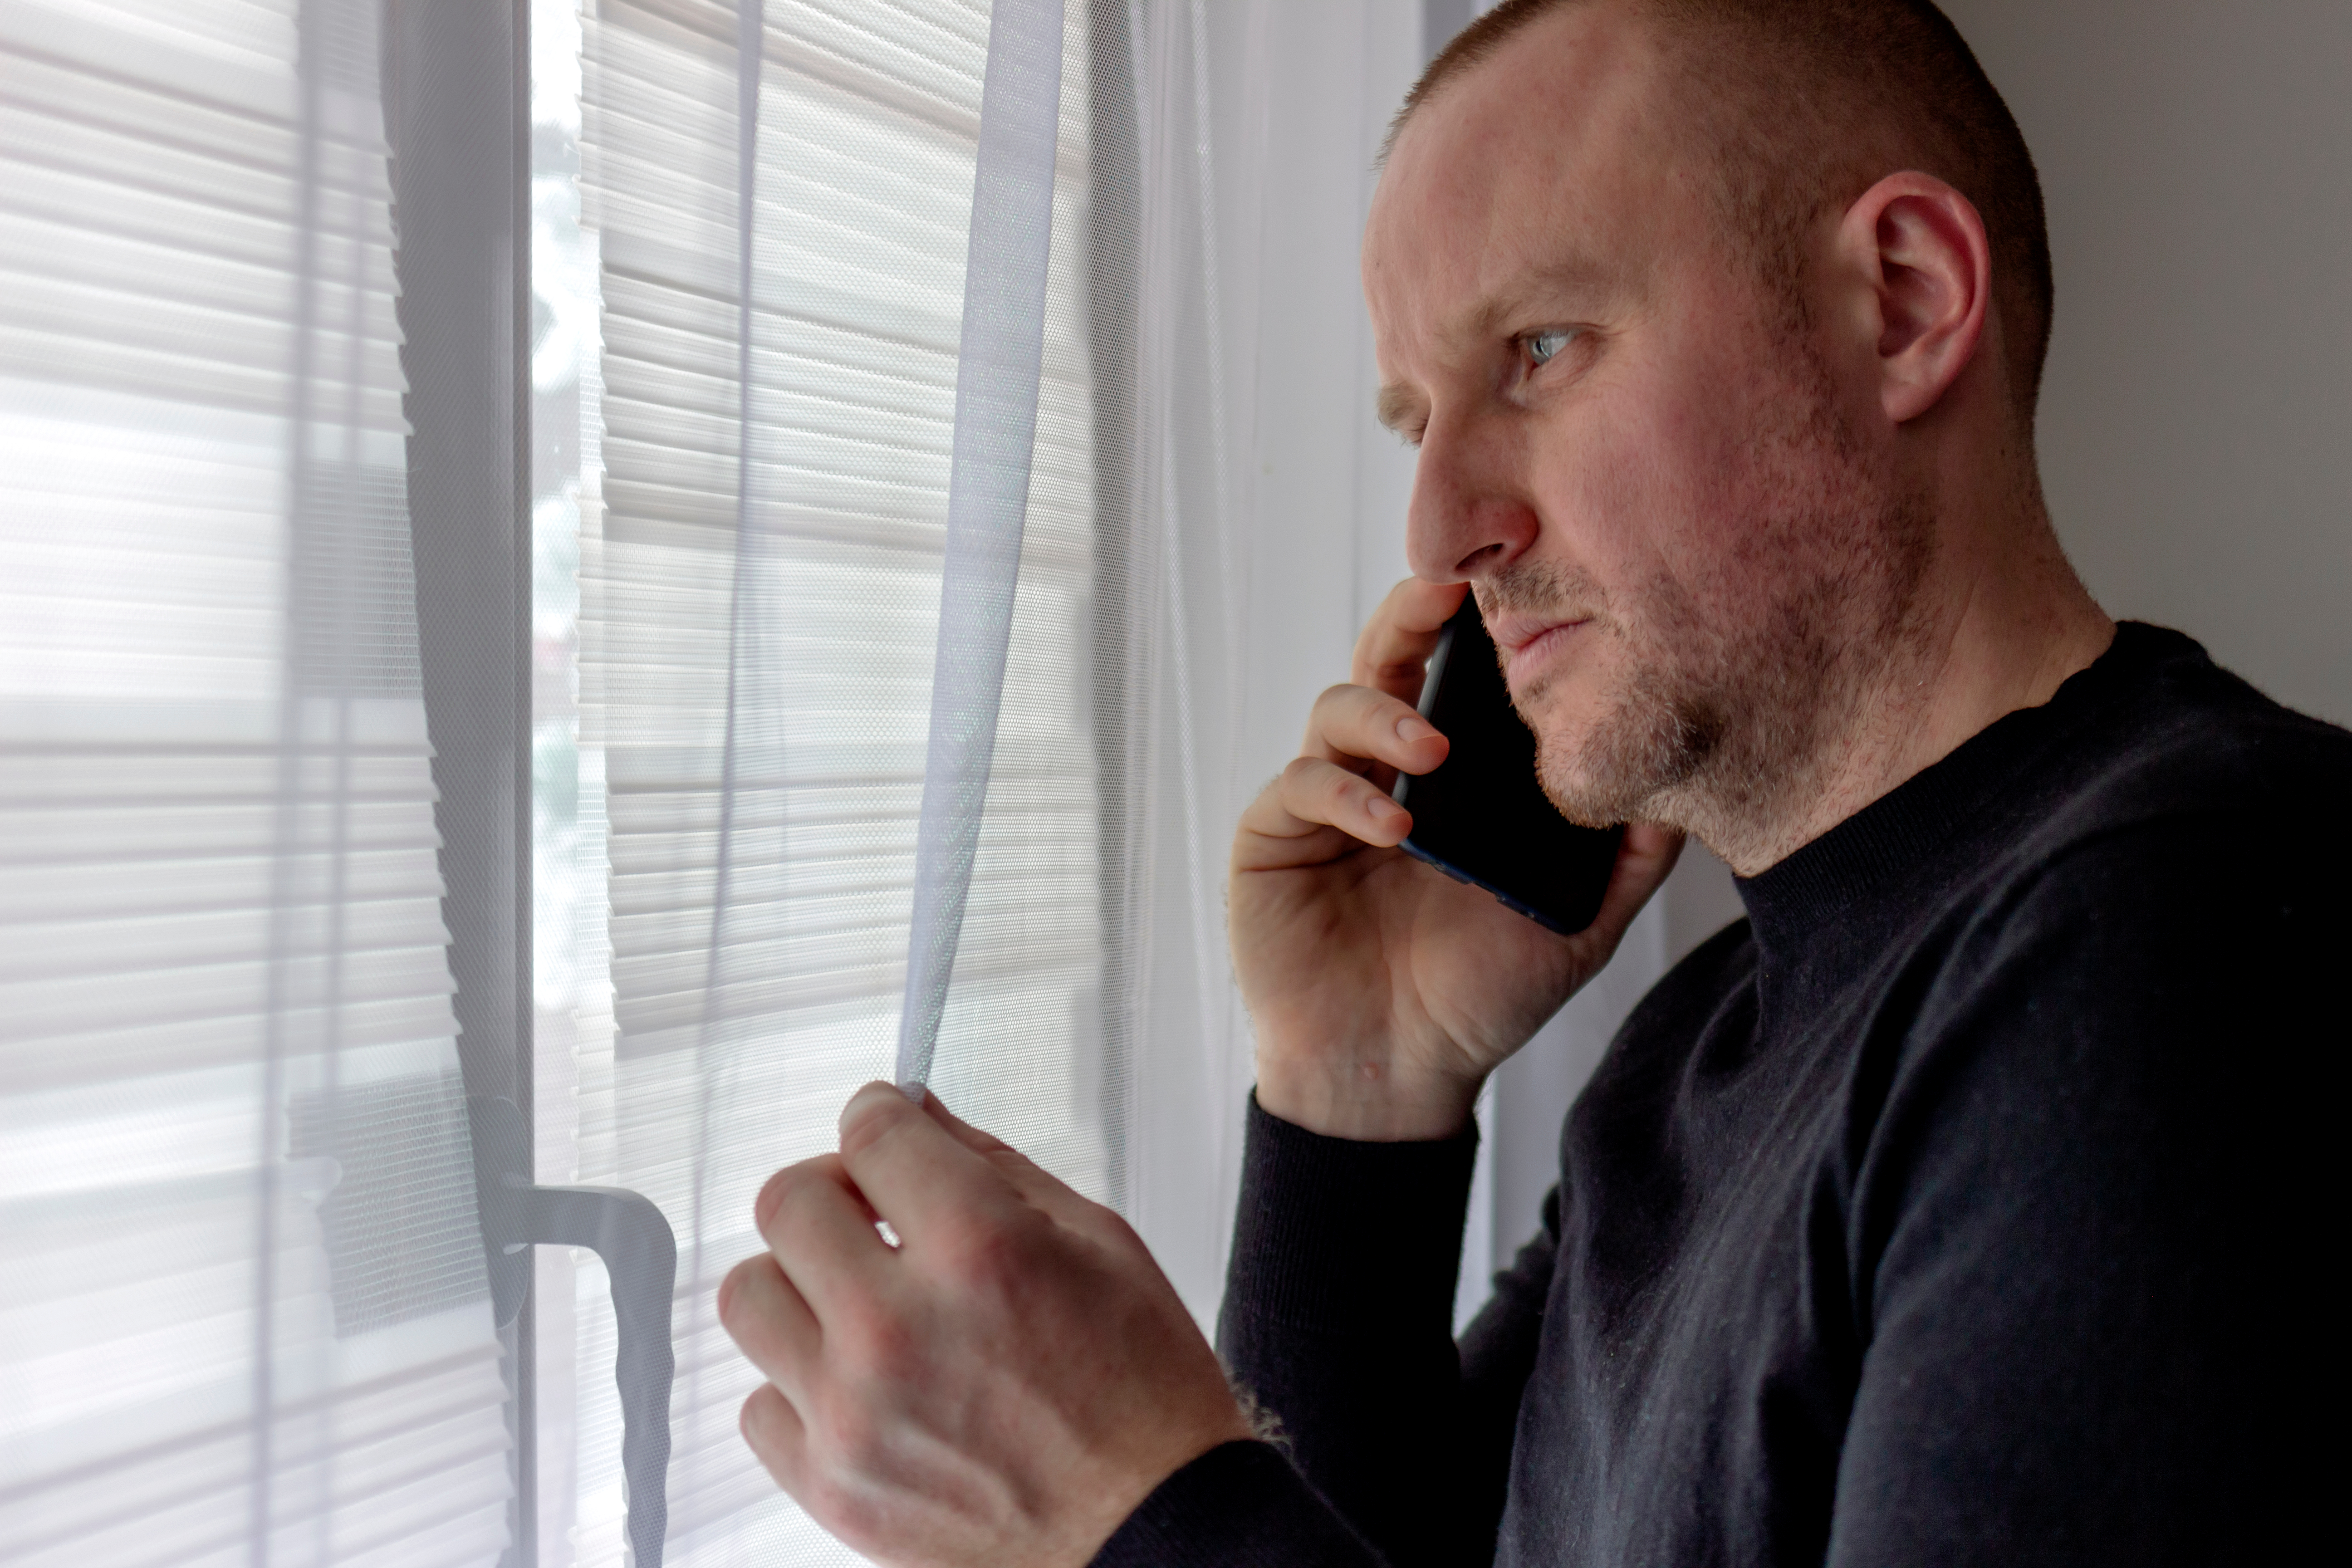 A man looking worried while on the phone | Source: Shutterstock